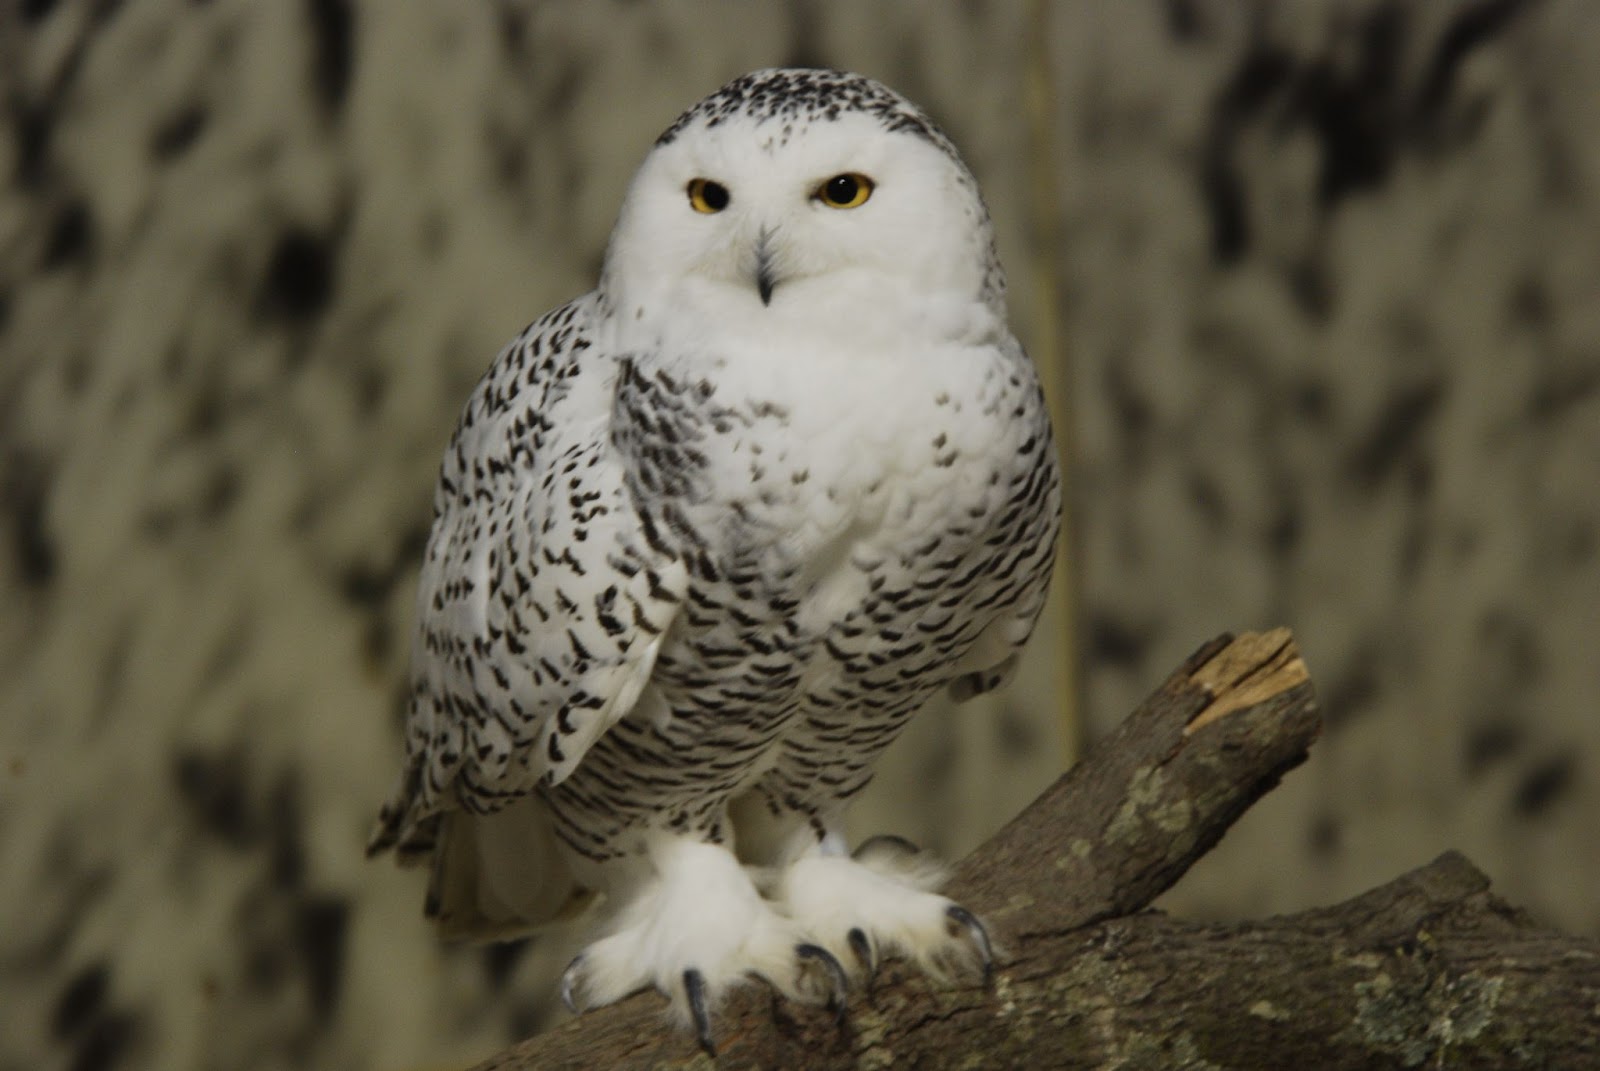 Photo credits to Flickr, “Arctic Owl in Fuzzy Slippers” by dbarronoss, used under CC BY-NC-ND 2.0 to illustrate an article by BioDB.com